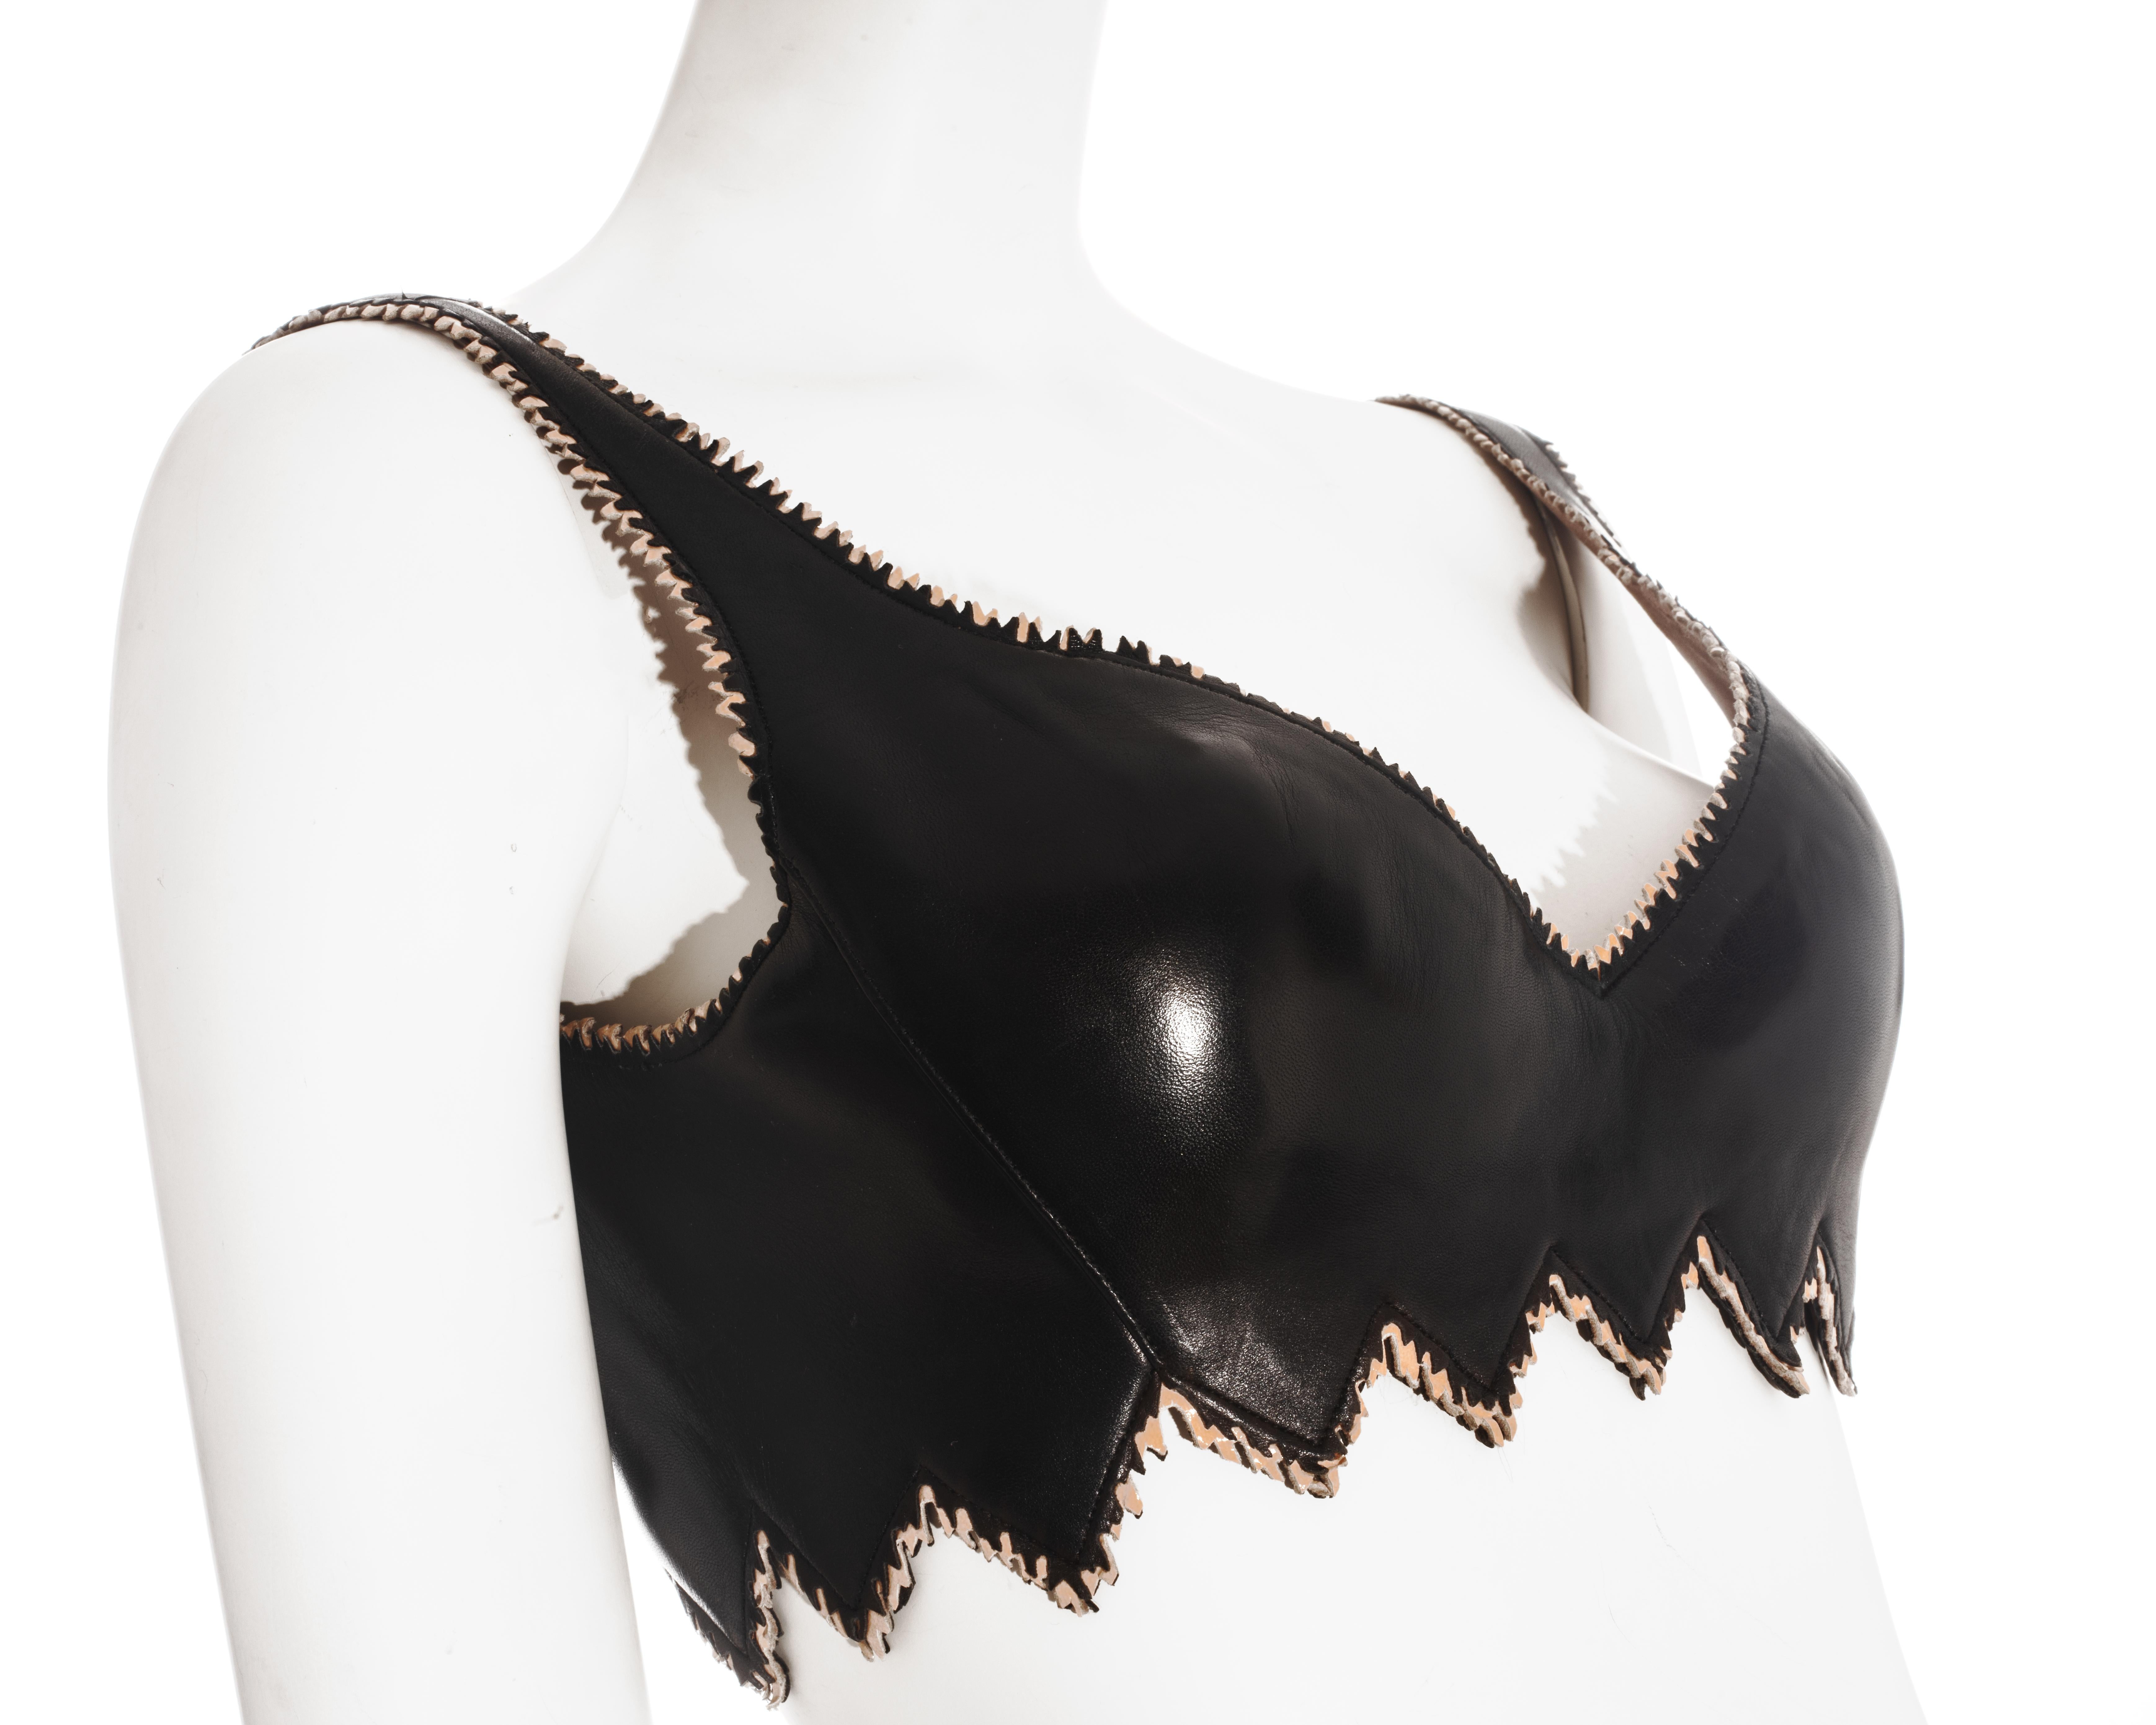 Azzedine Alaia black leather corseted bra with laser-cut jagged edge, built-in padded bra, adjustable size with lace up fastening and side zip closure. 

Fall-Winter 1994
